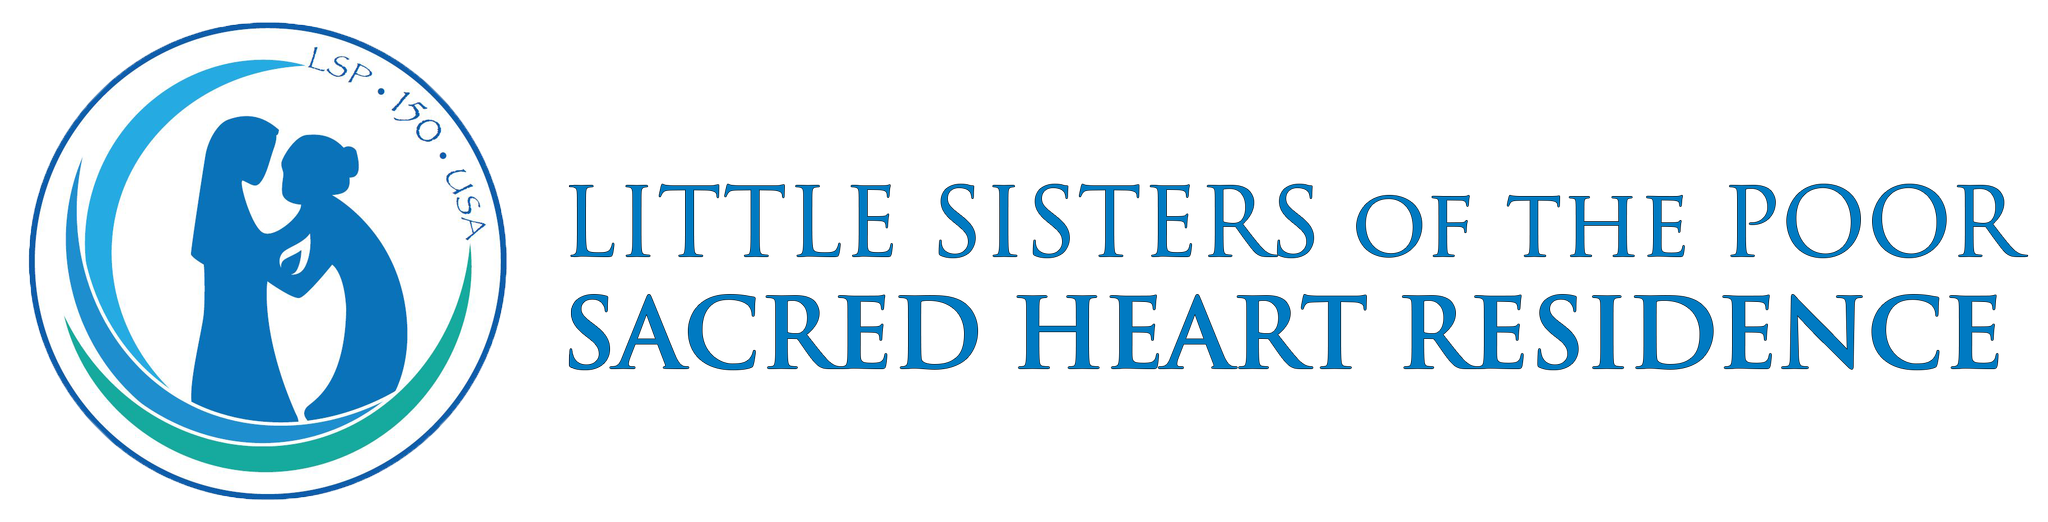 Little Sisters of the Poor Mobile